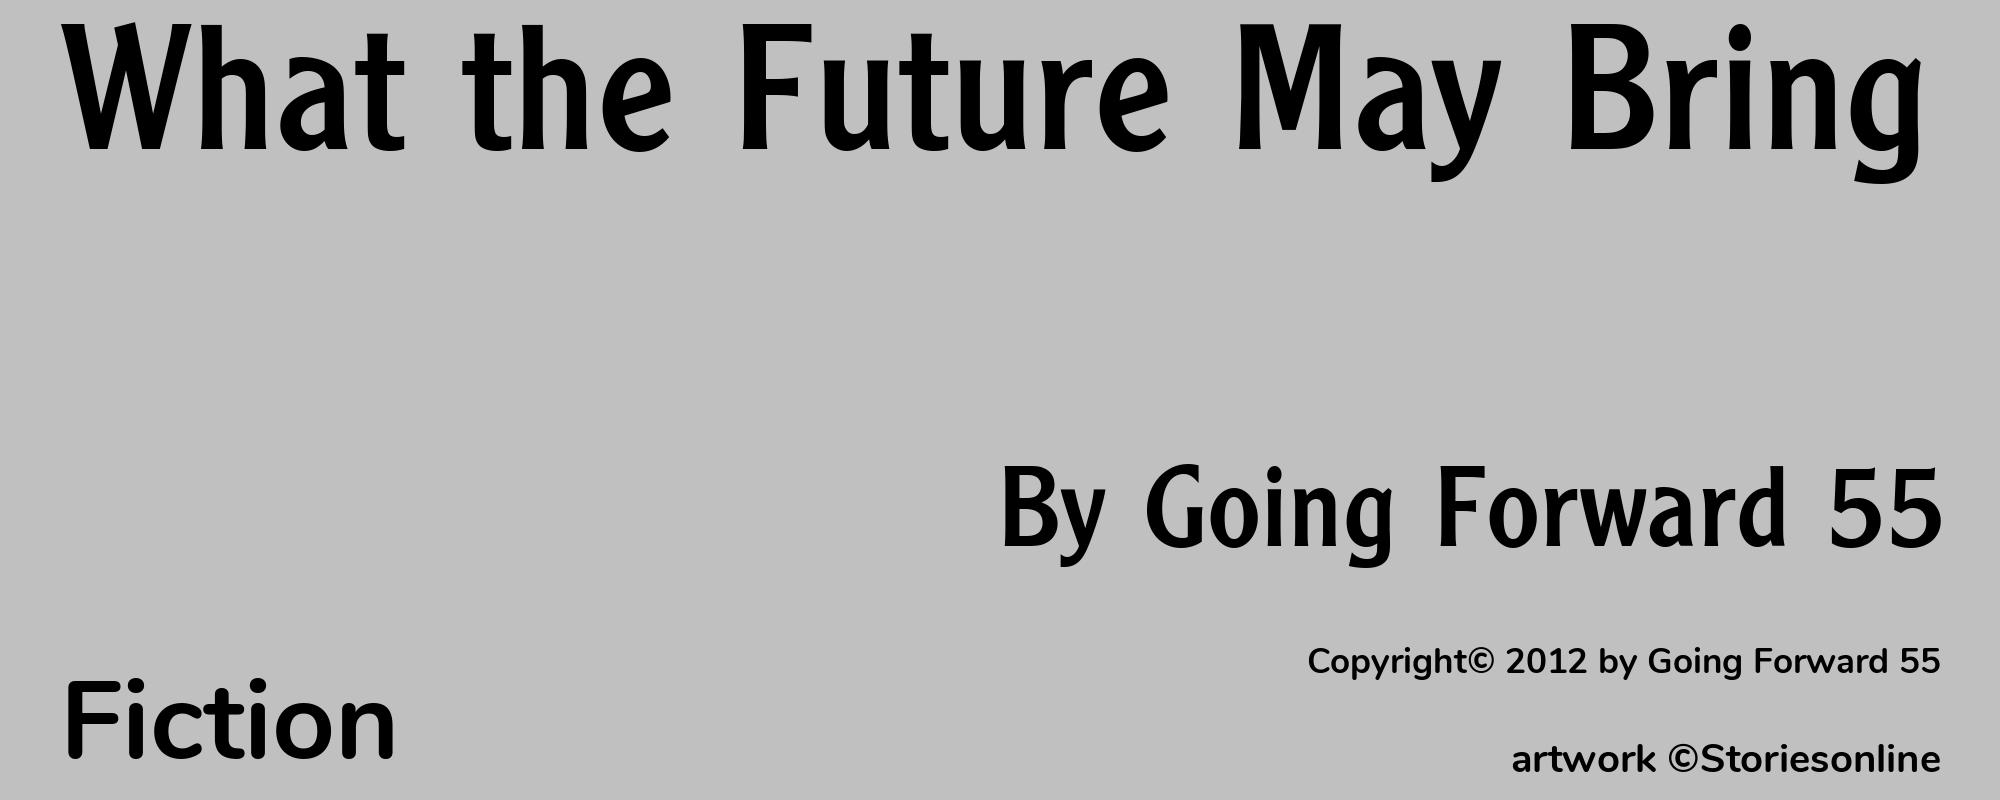 What the Future May Bring - Cover